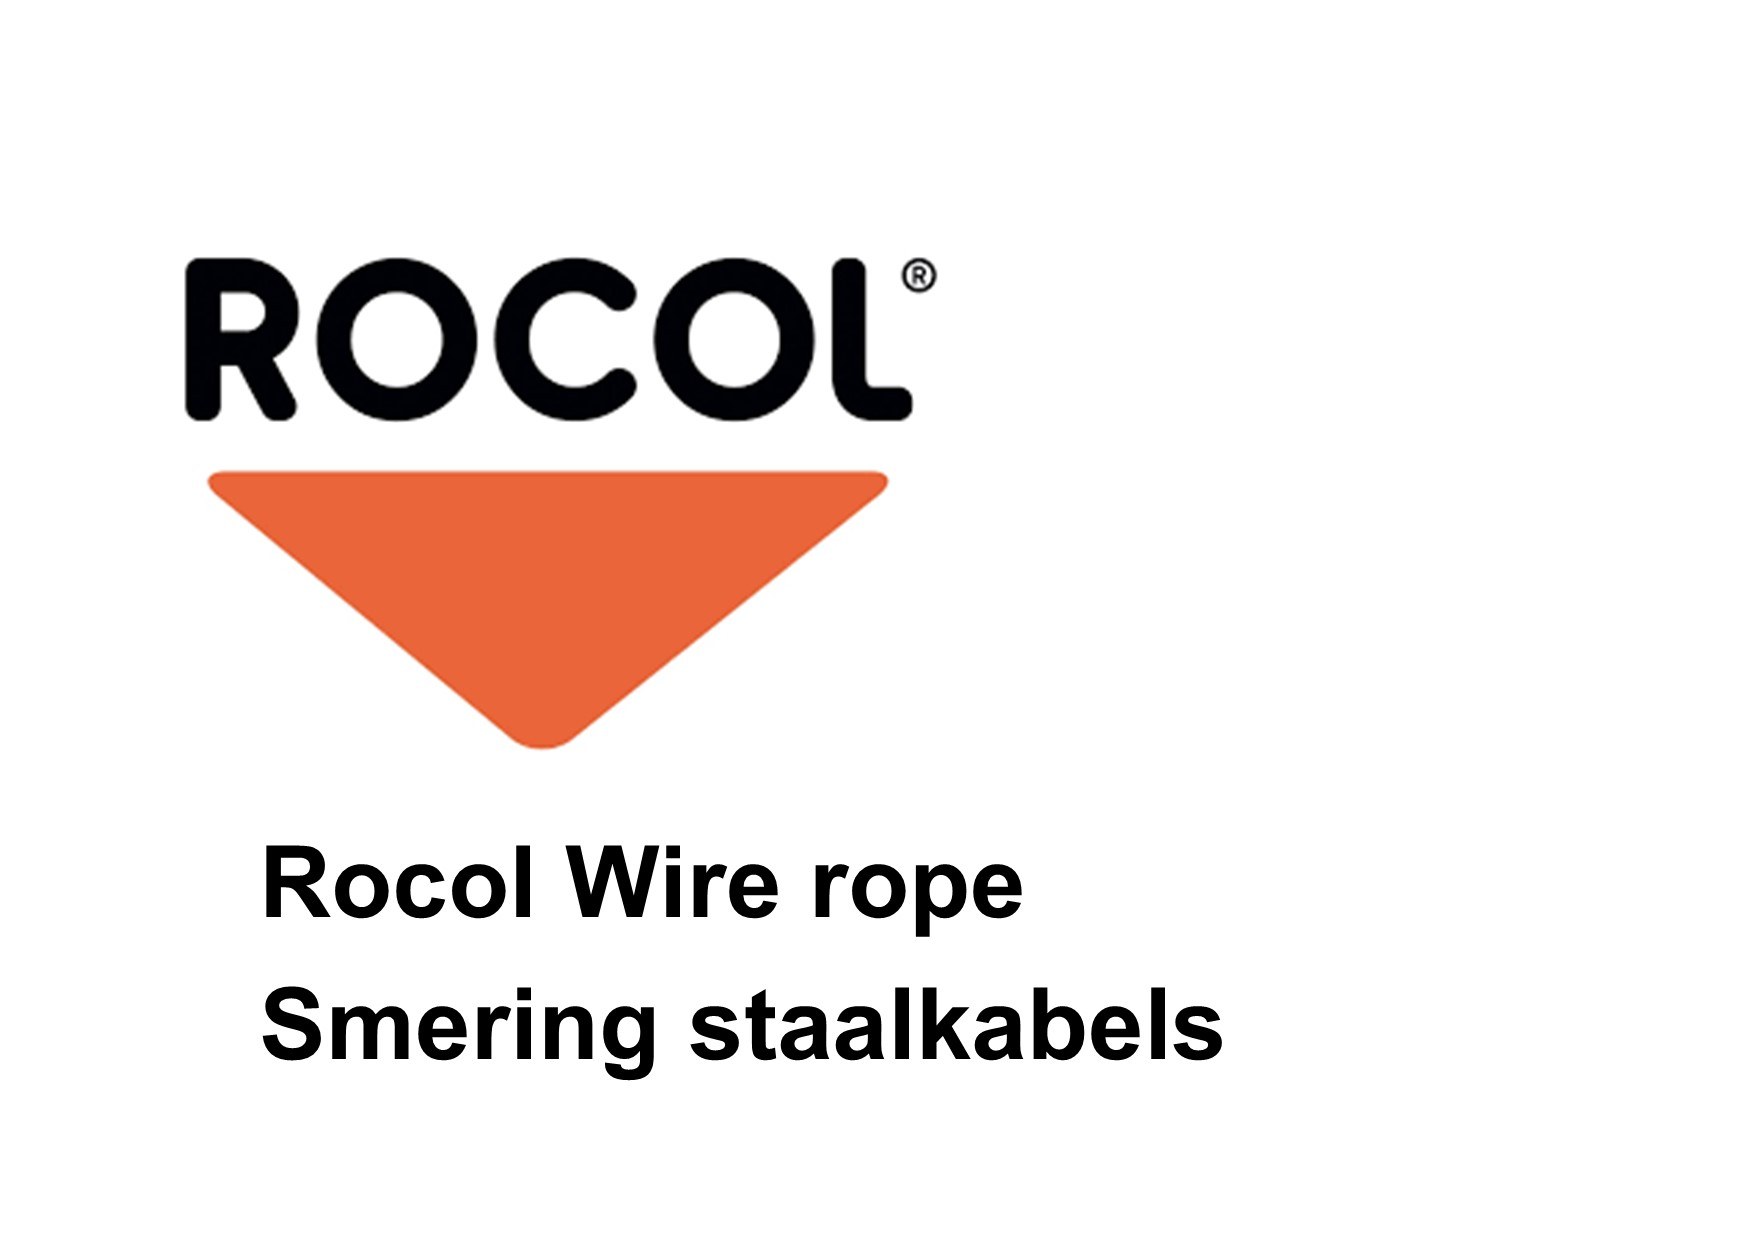 Rocol wire rope